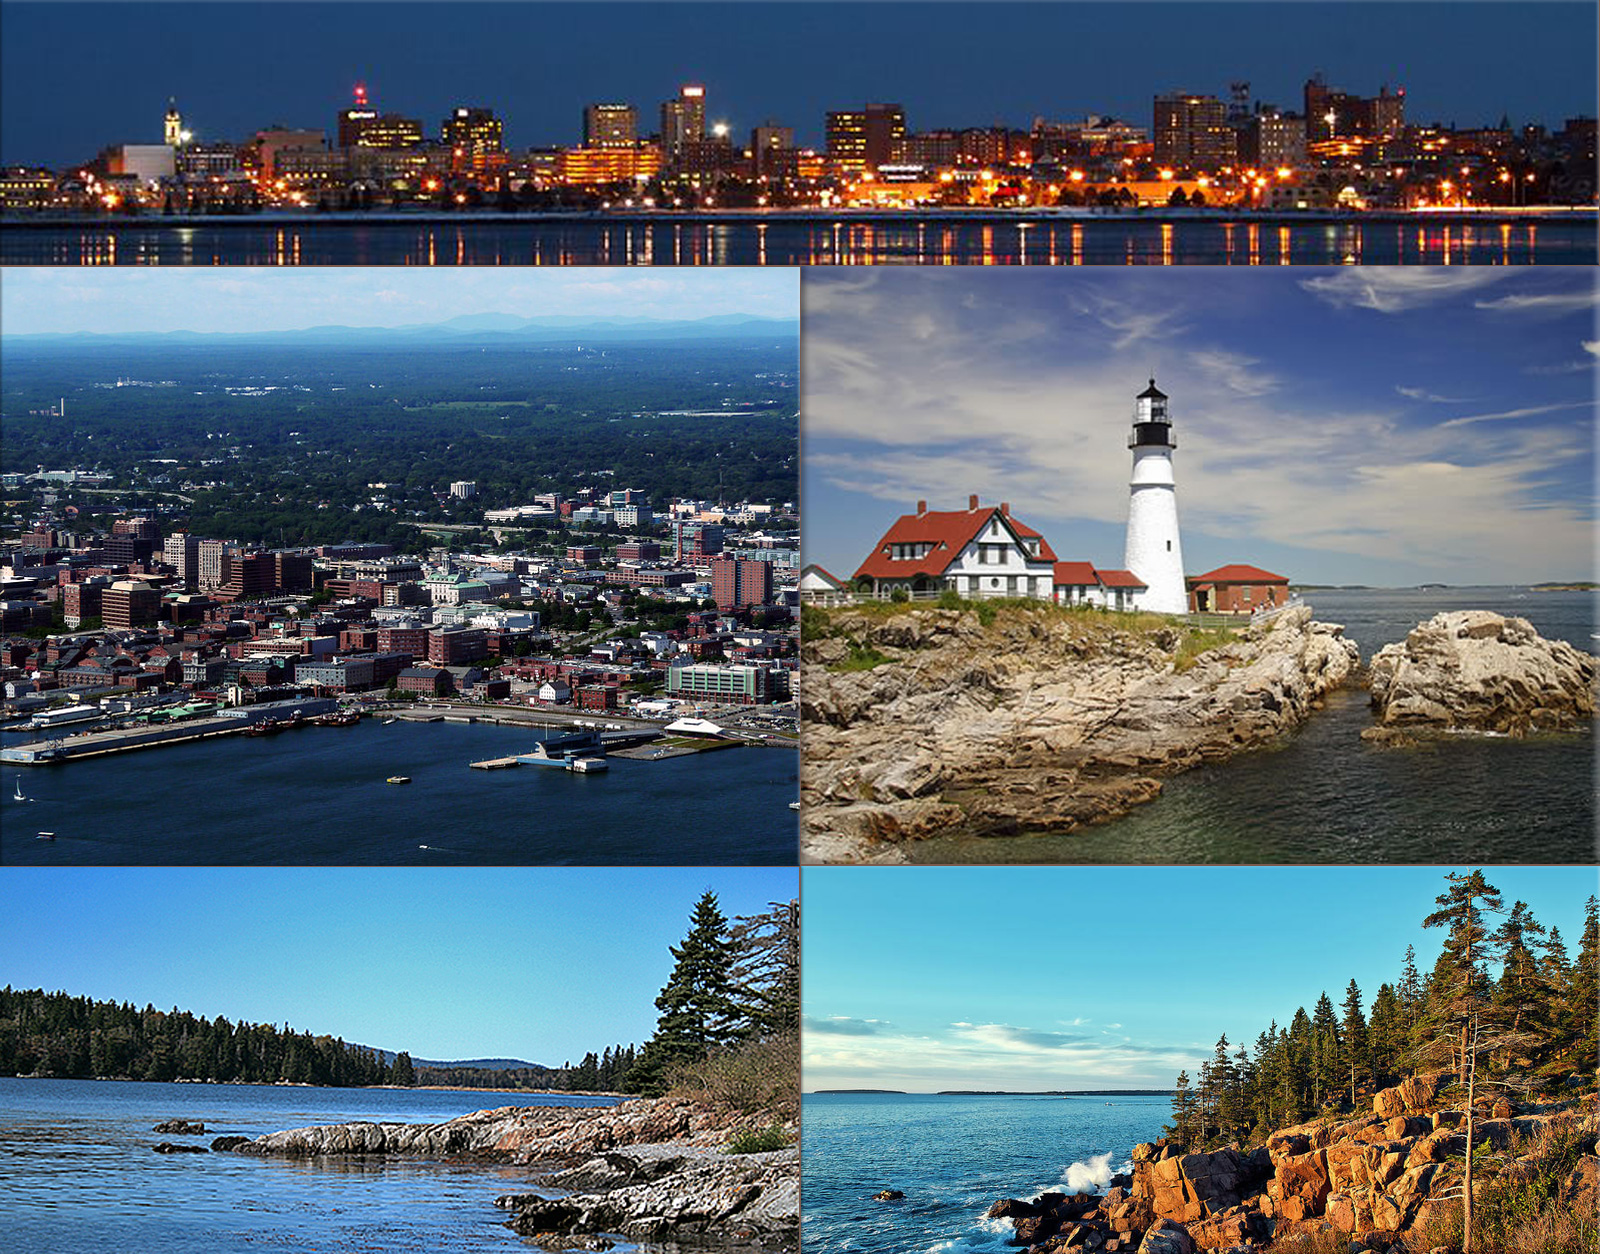 Maine becomes the 23rd U.S. state on March 15th, 1820